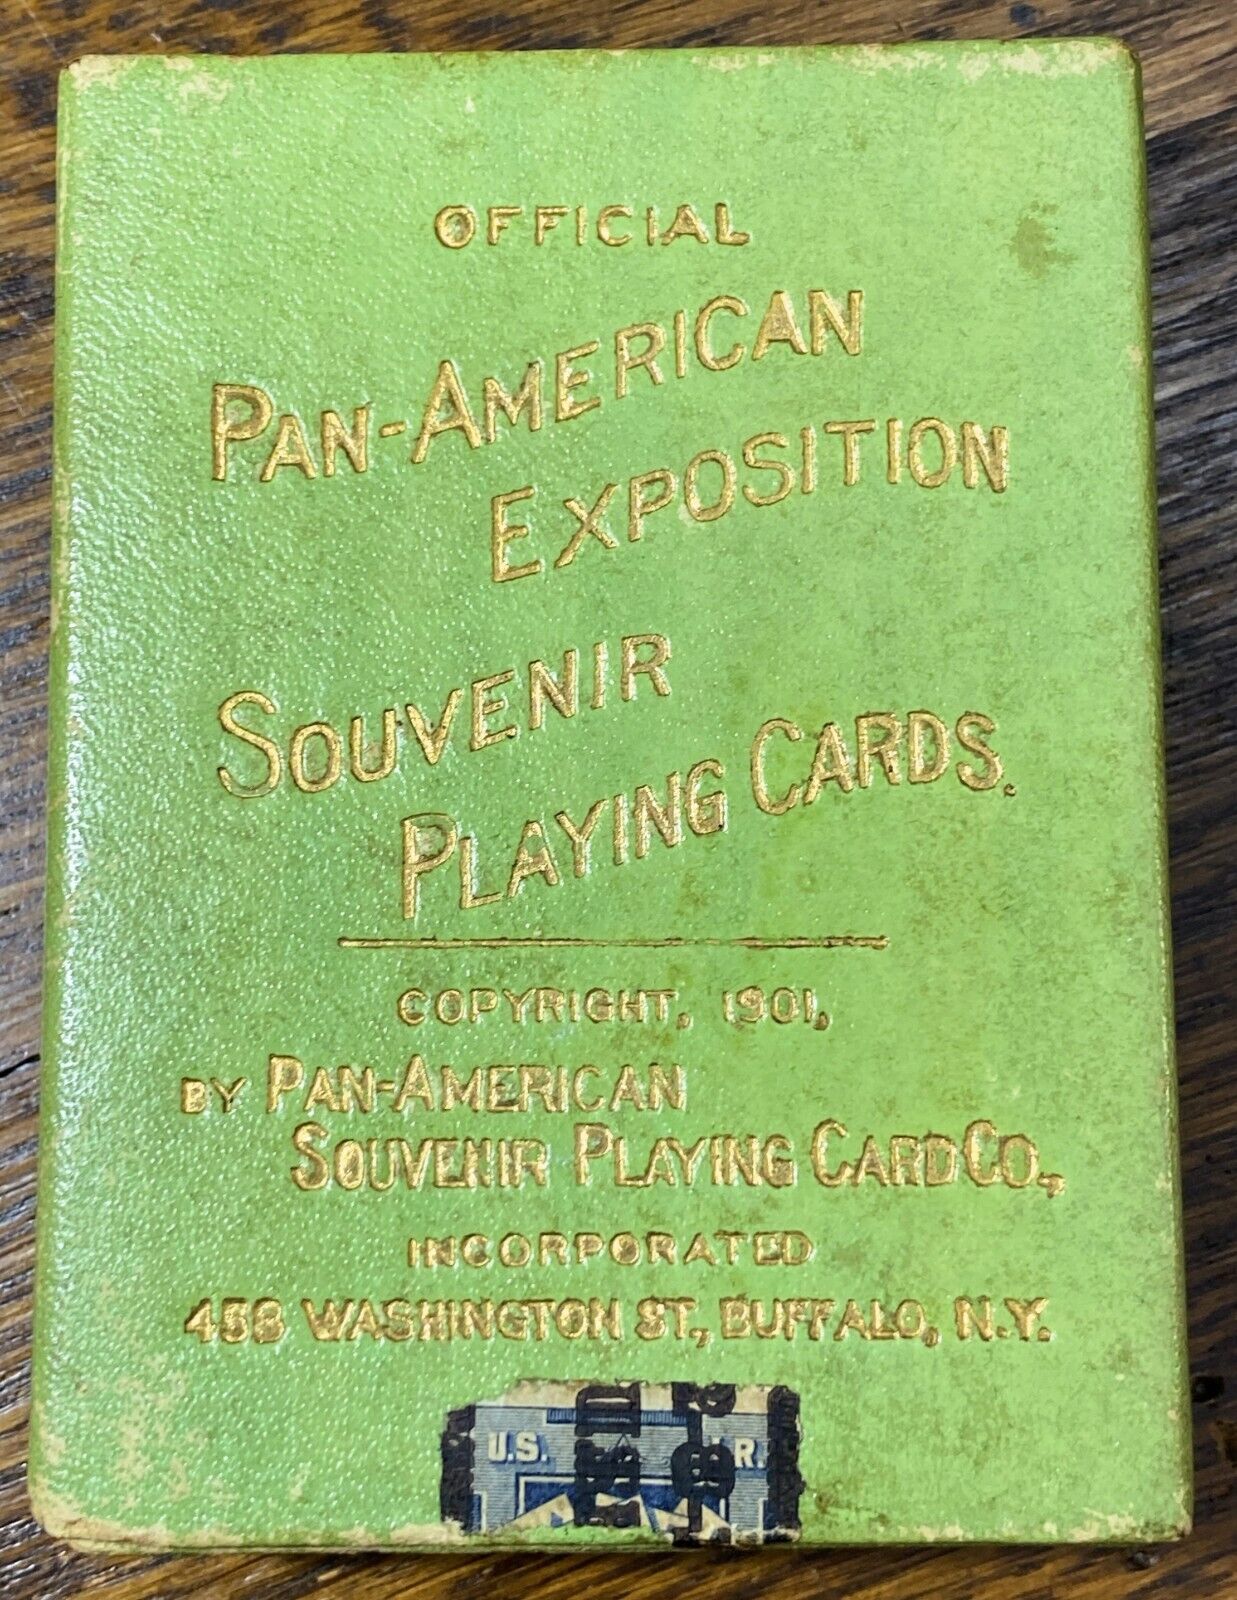 Superb Official 1901 Pan-American Exposition Souvenir Playing Cards